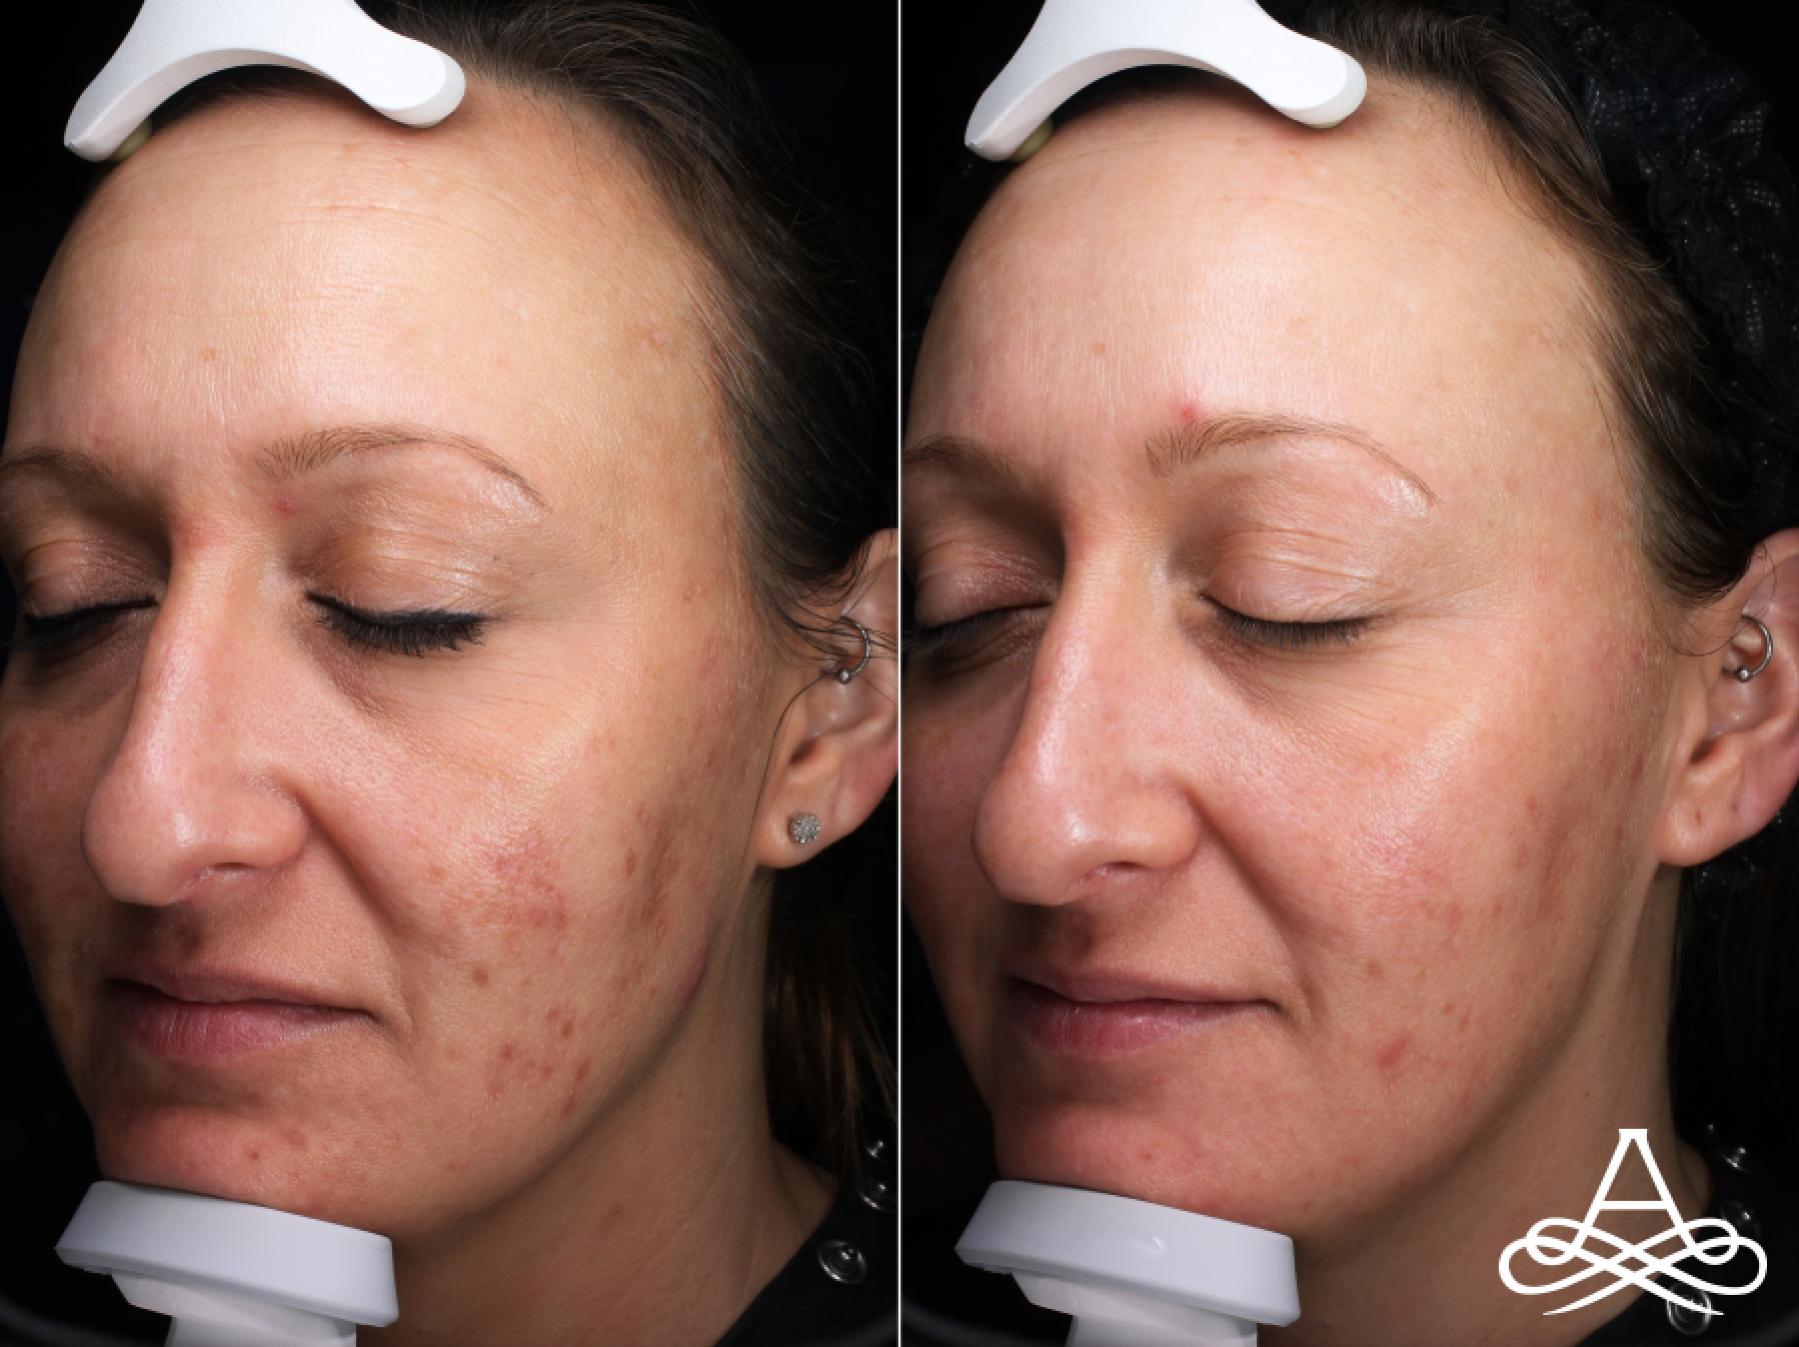 Acne Scars: Patient 1 - Before and After 2